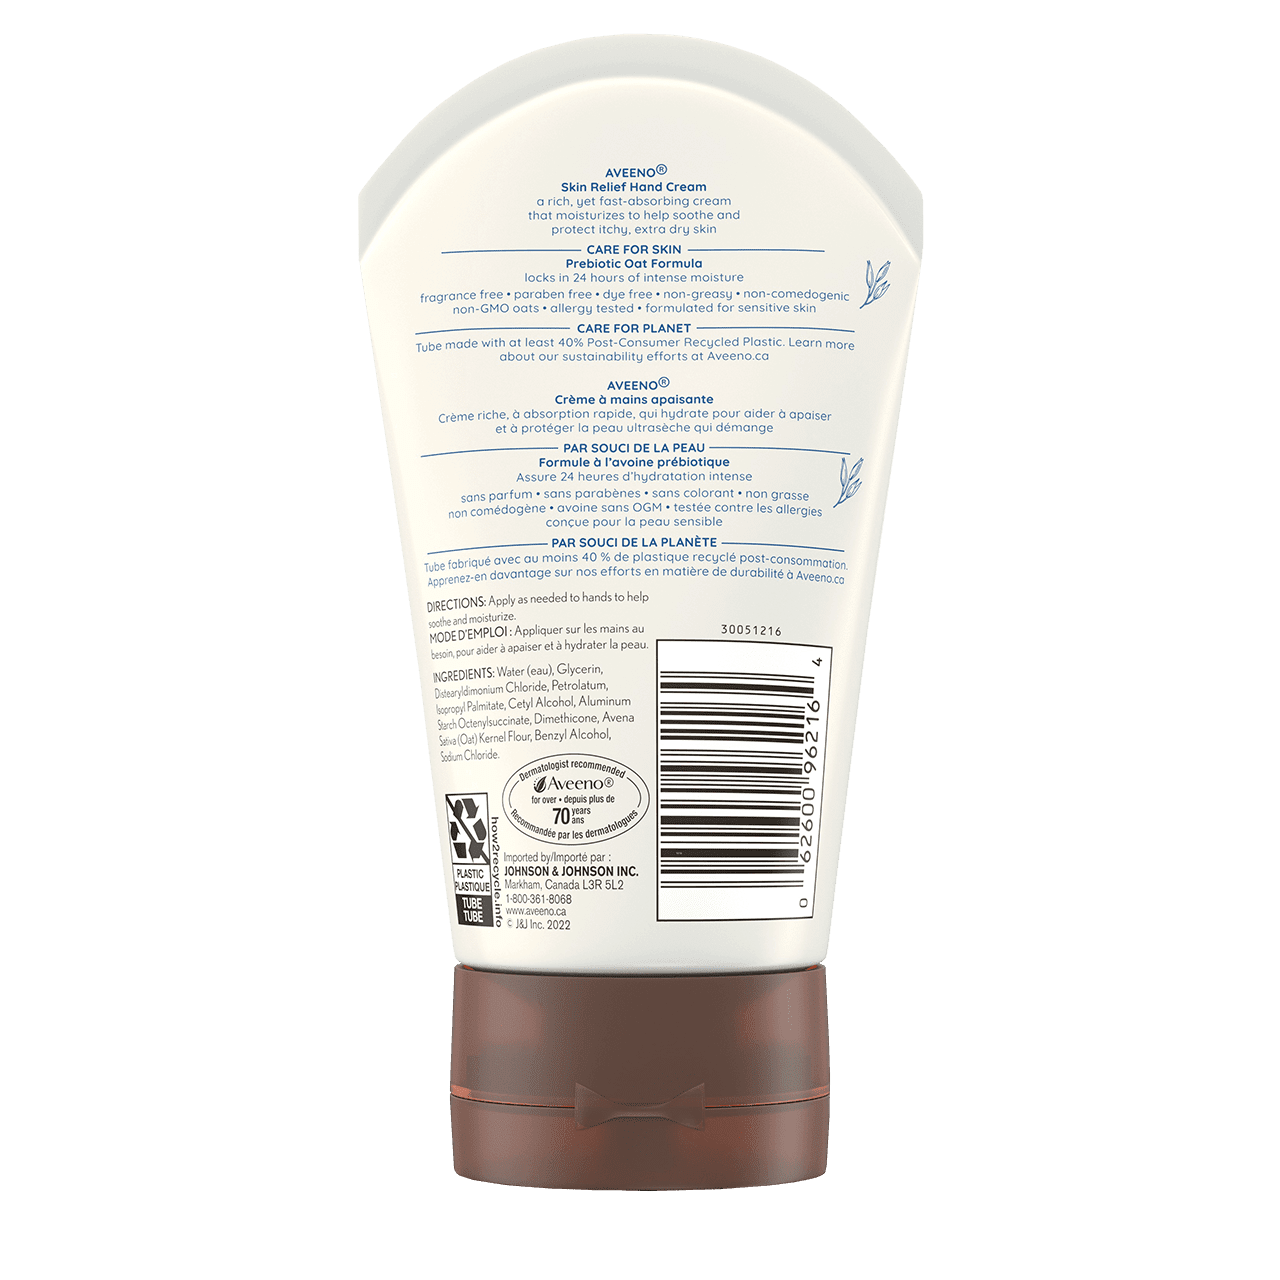 AVEENO® Skin Relief Hand Cream, Fragrance-free, 97ml squeeze tube, back label